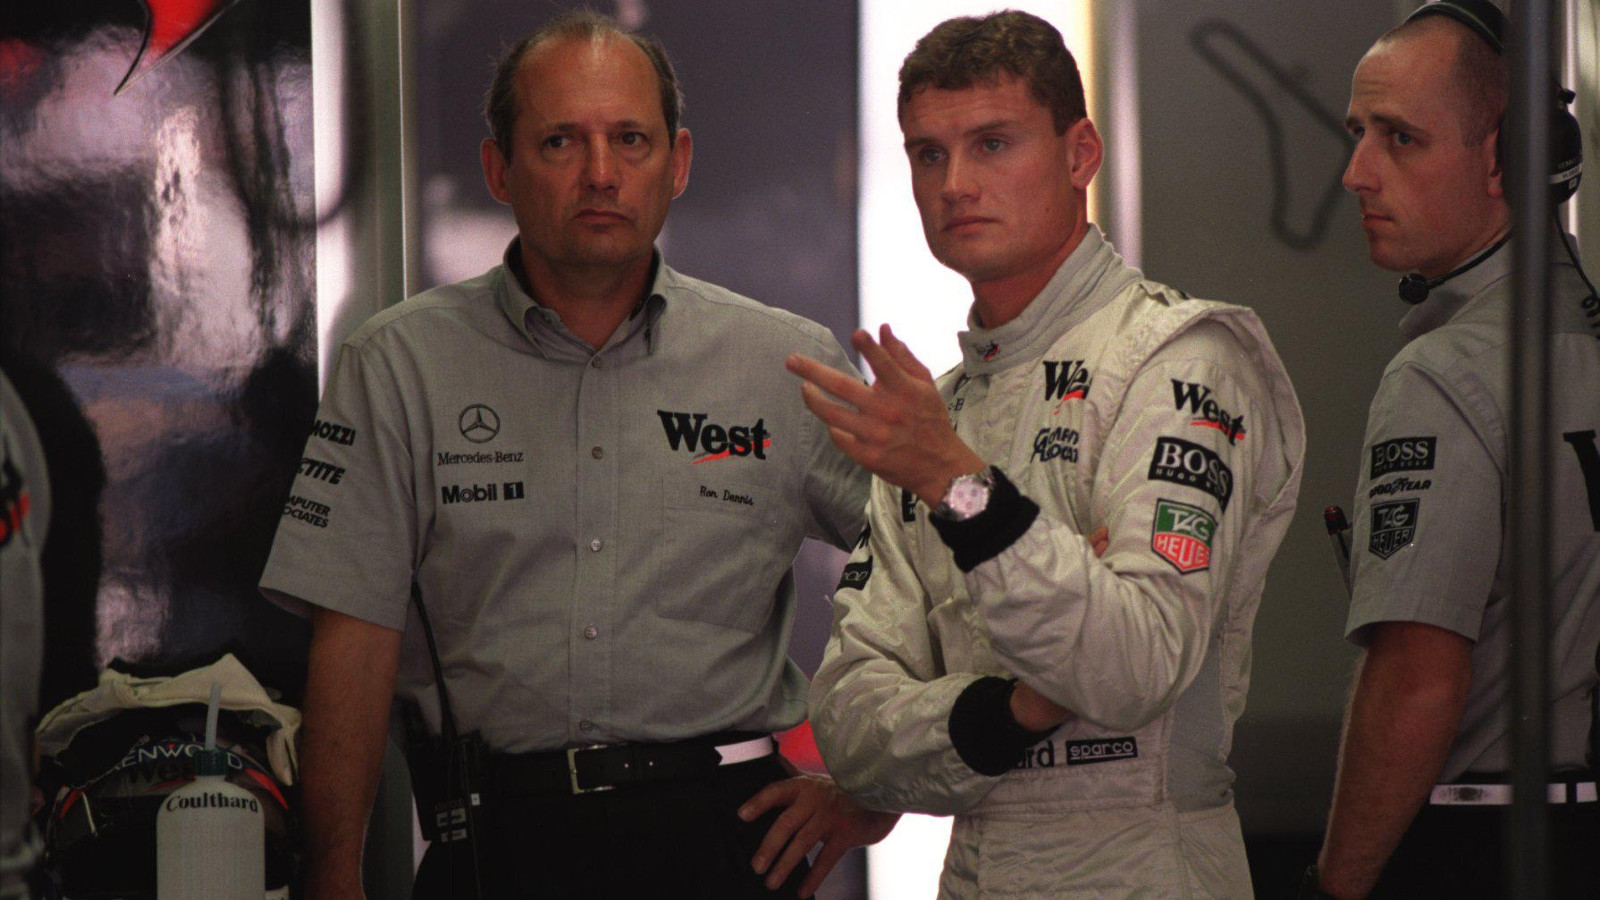 1997: David Coulthard chats with McLaren team boss Ron Dennis.